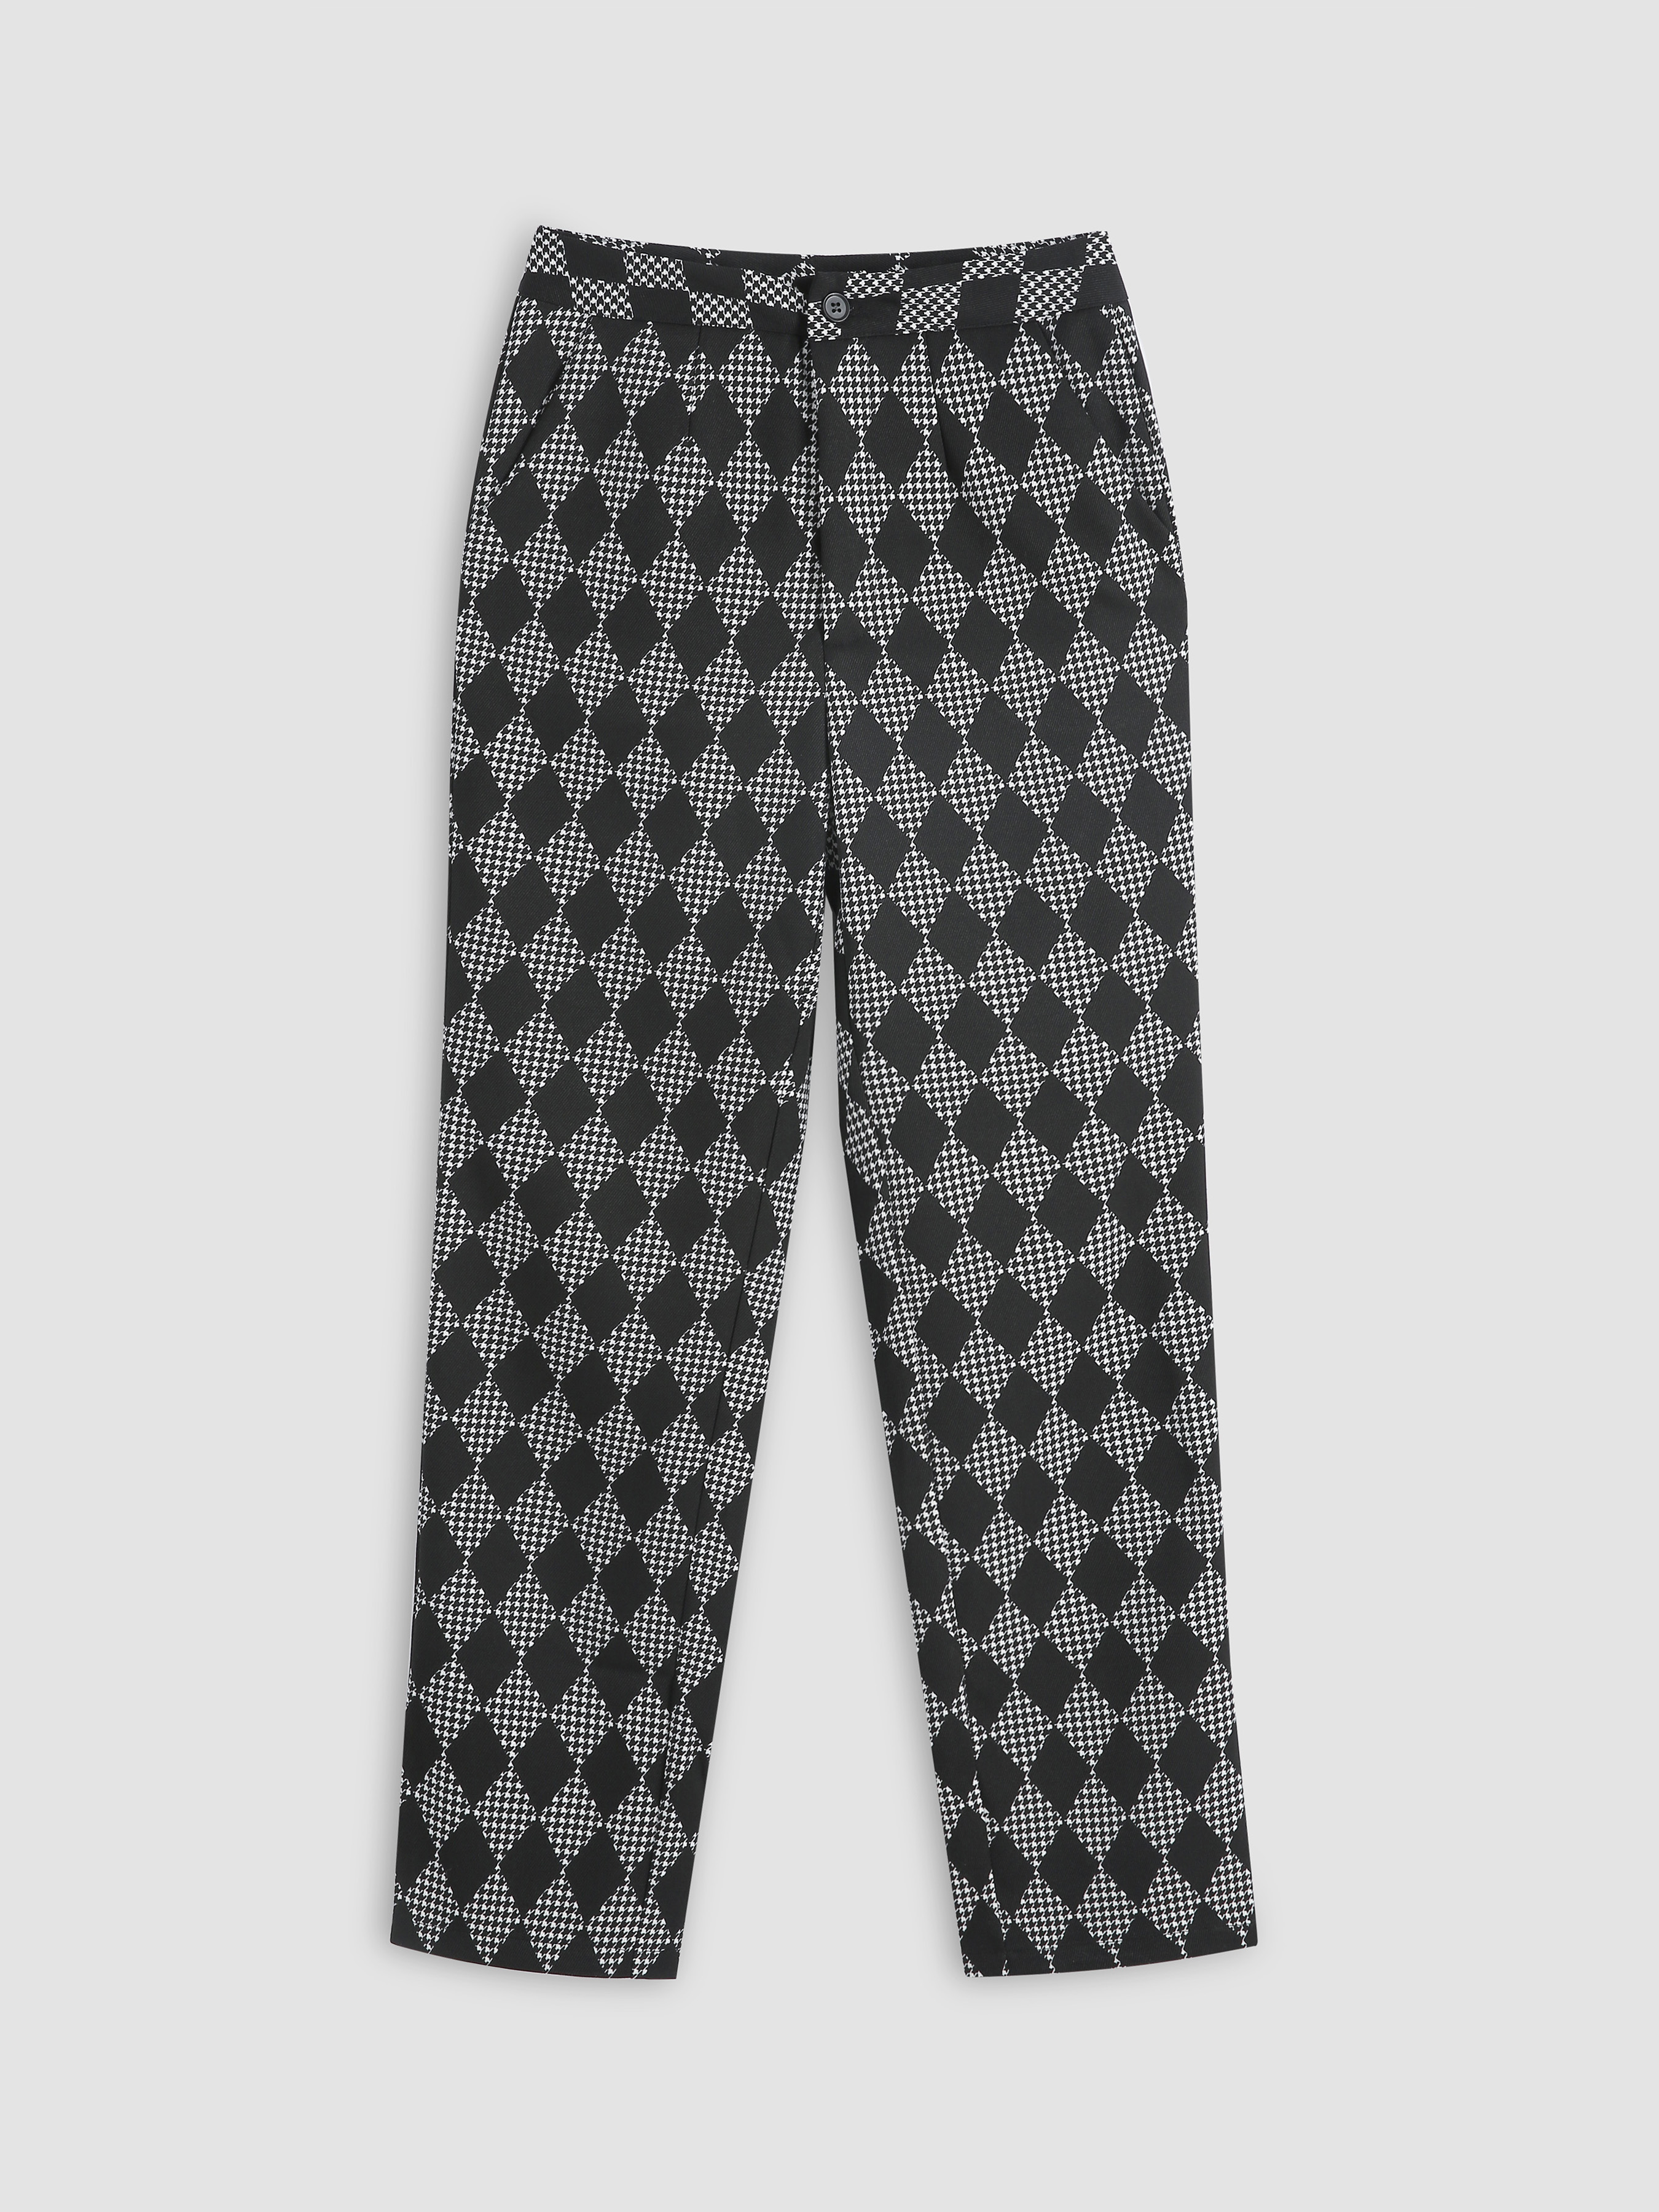 Argyle Houndstooth Pattern Pants For Exhibition